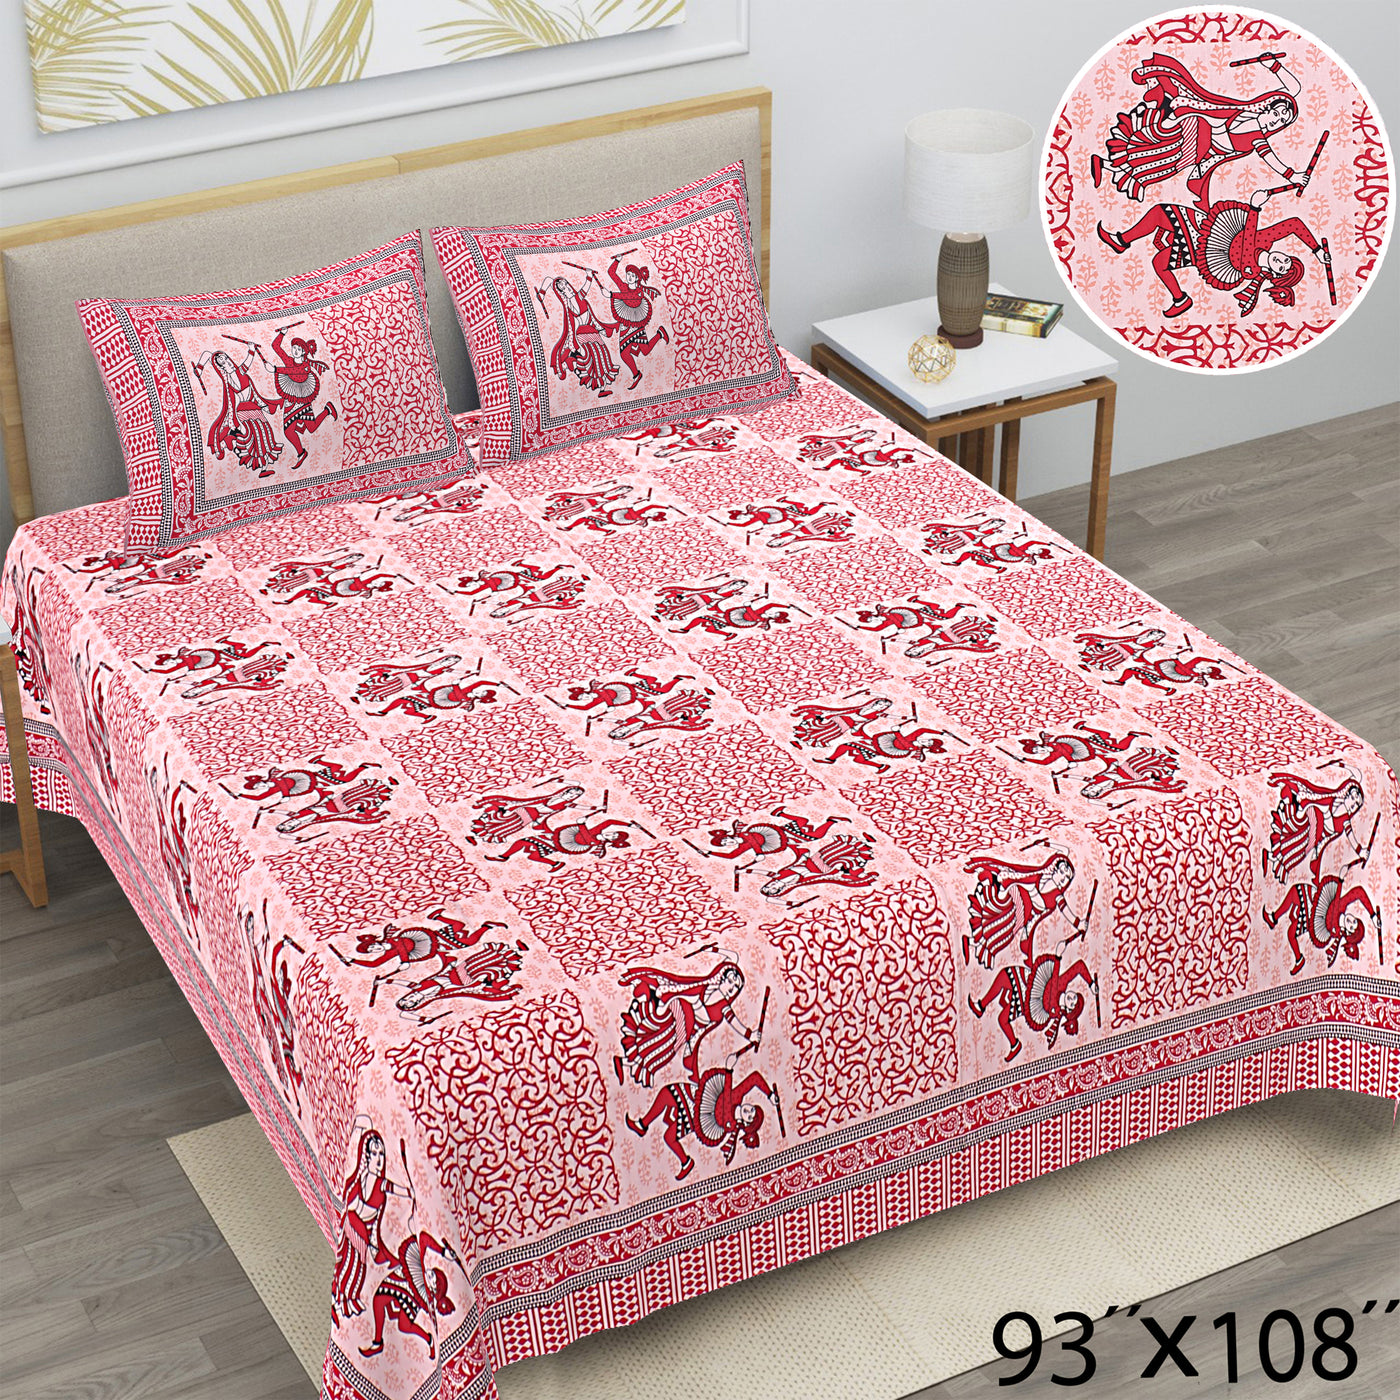 Braise Premium | Full Size 87 x 104 in | 100% Pure Cotton | Double Bedsheet with 2 Pillow Covers (PKC 03)